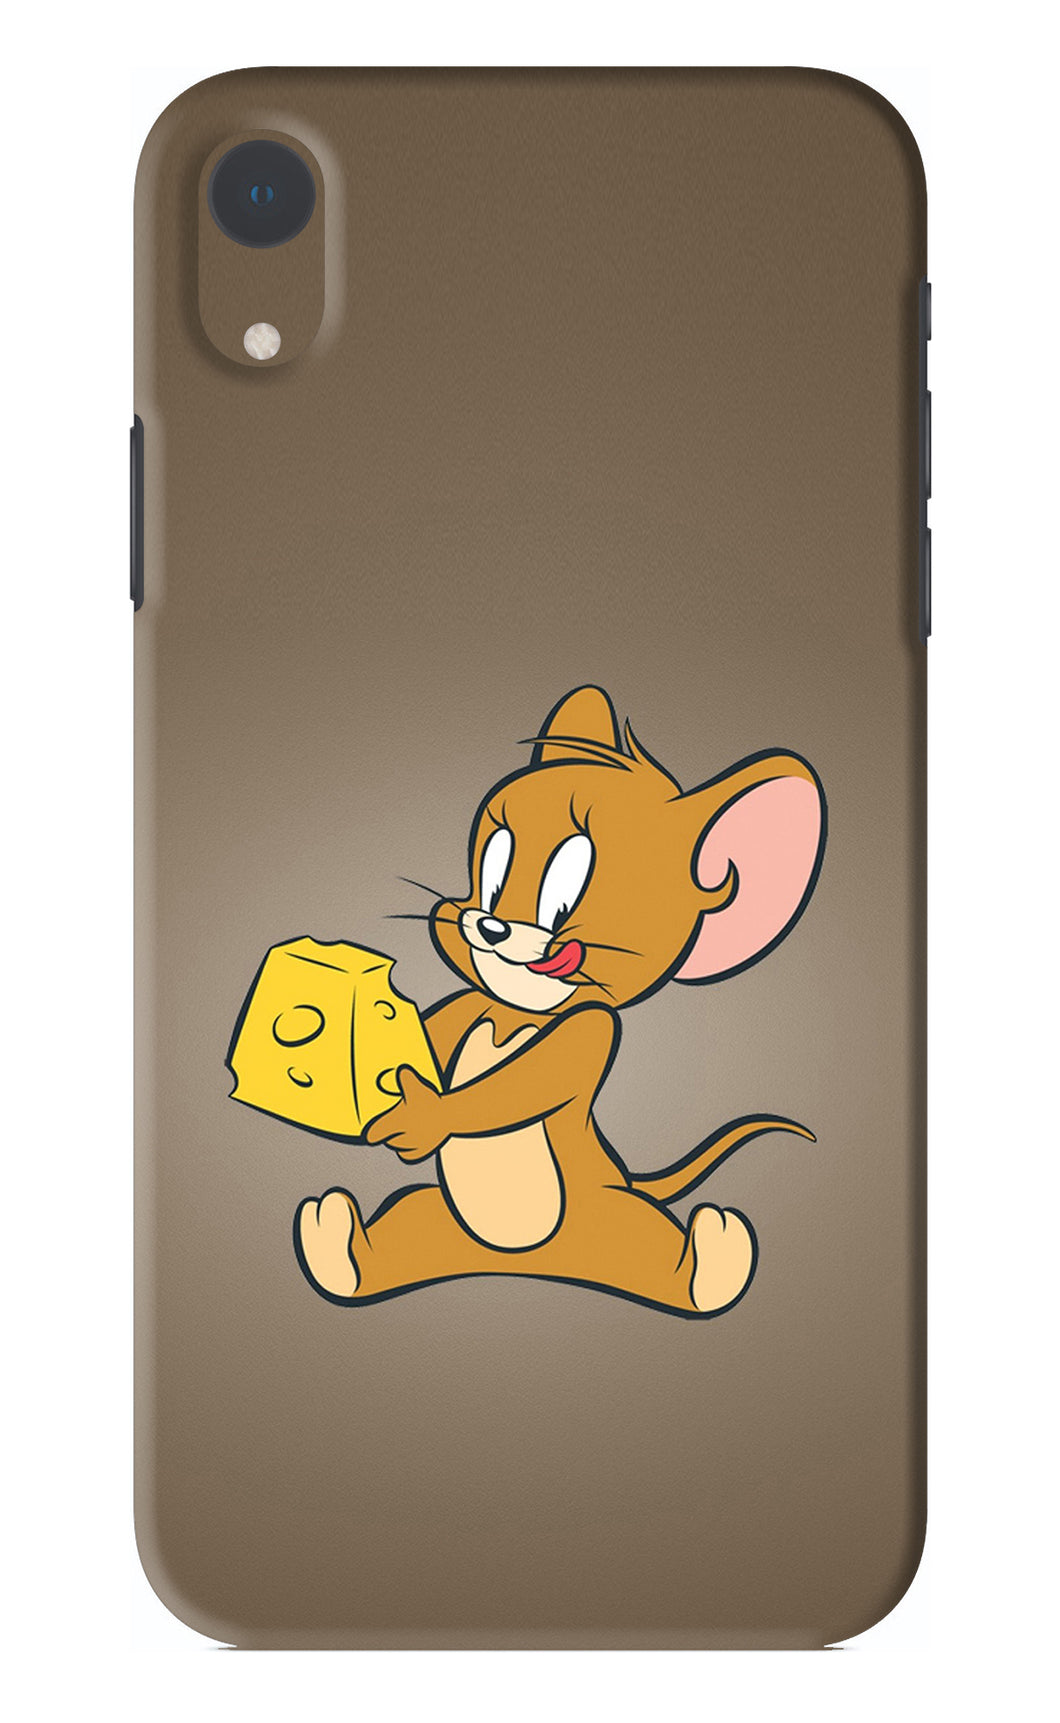 Jerry iPhone XR Back Skin Wrap